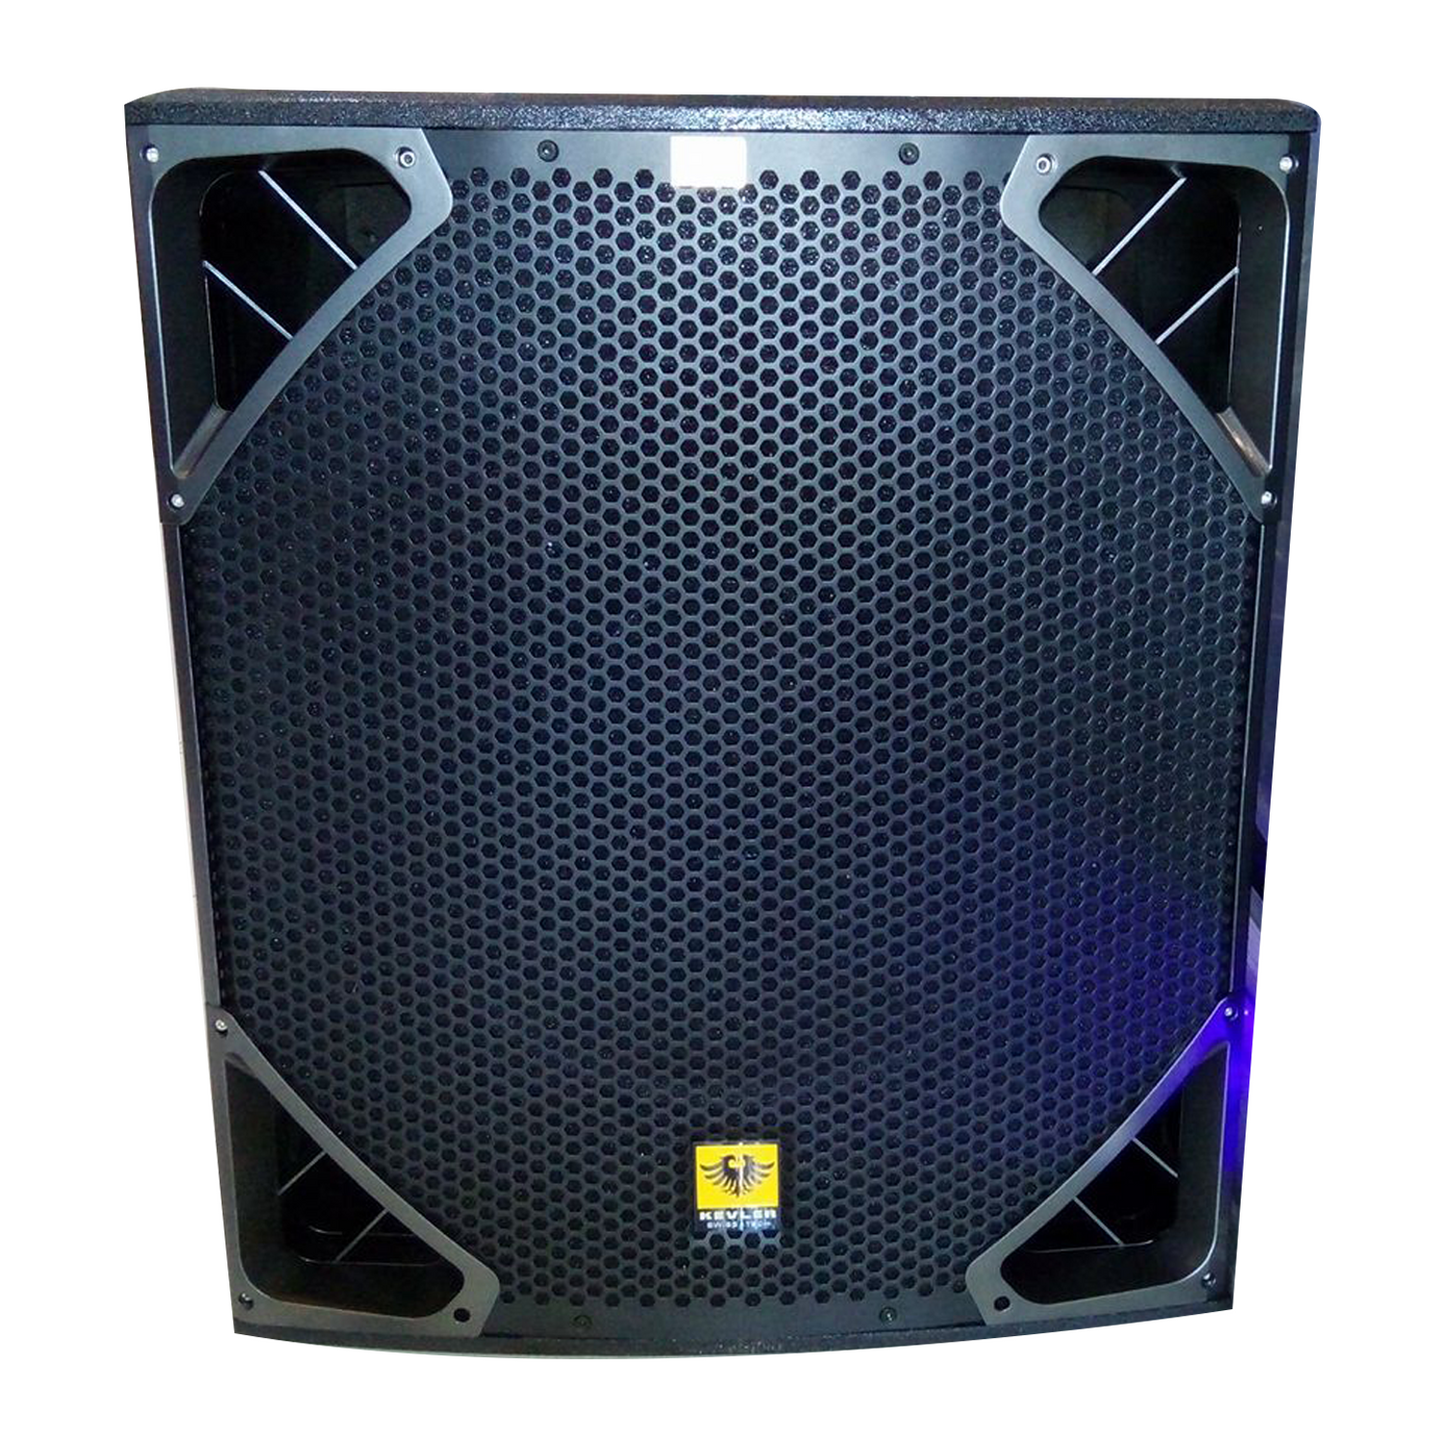 KEVLER KRX-618SA 18" 800W Powered Active Subwoofer Bass Speakers (PAIR) with Built-In Class D Amplifier, XLR and 6.5mm TRS AUX Line In and Vertical Pole Mounting Port